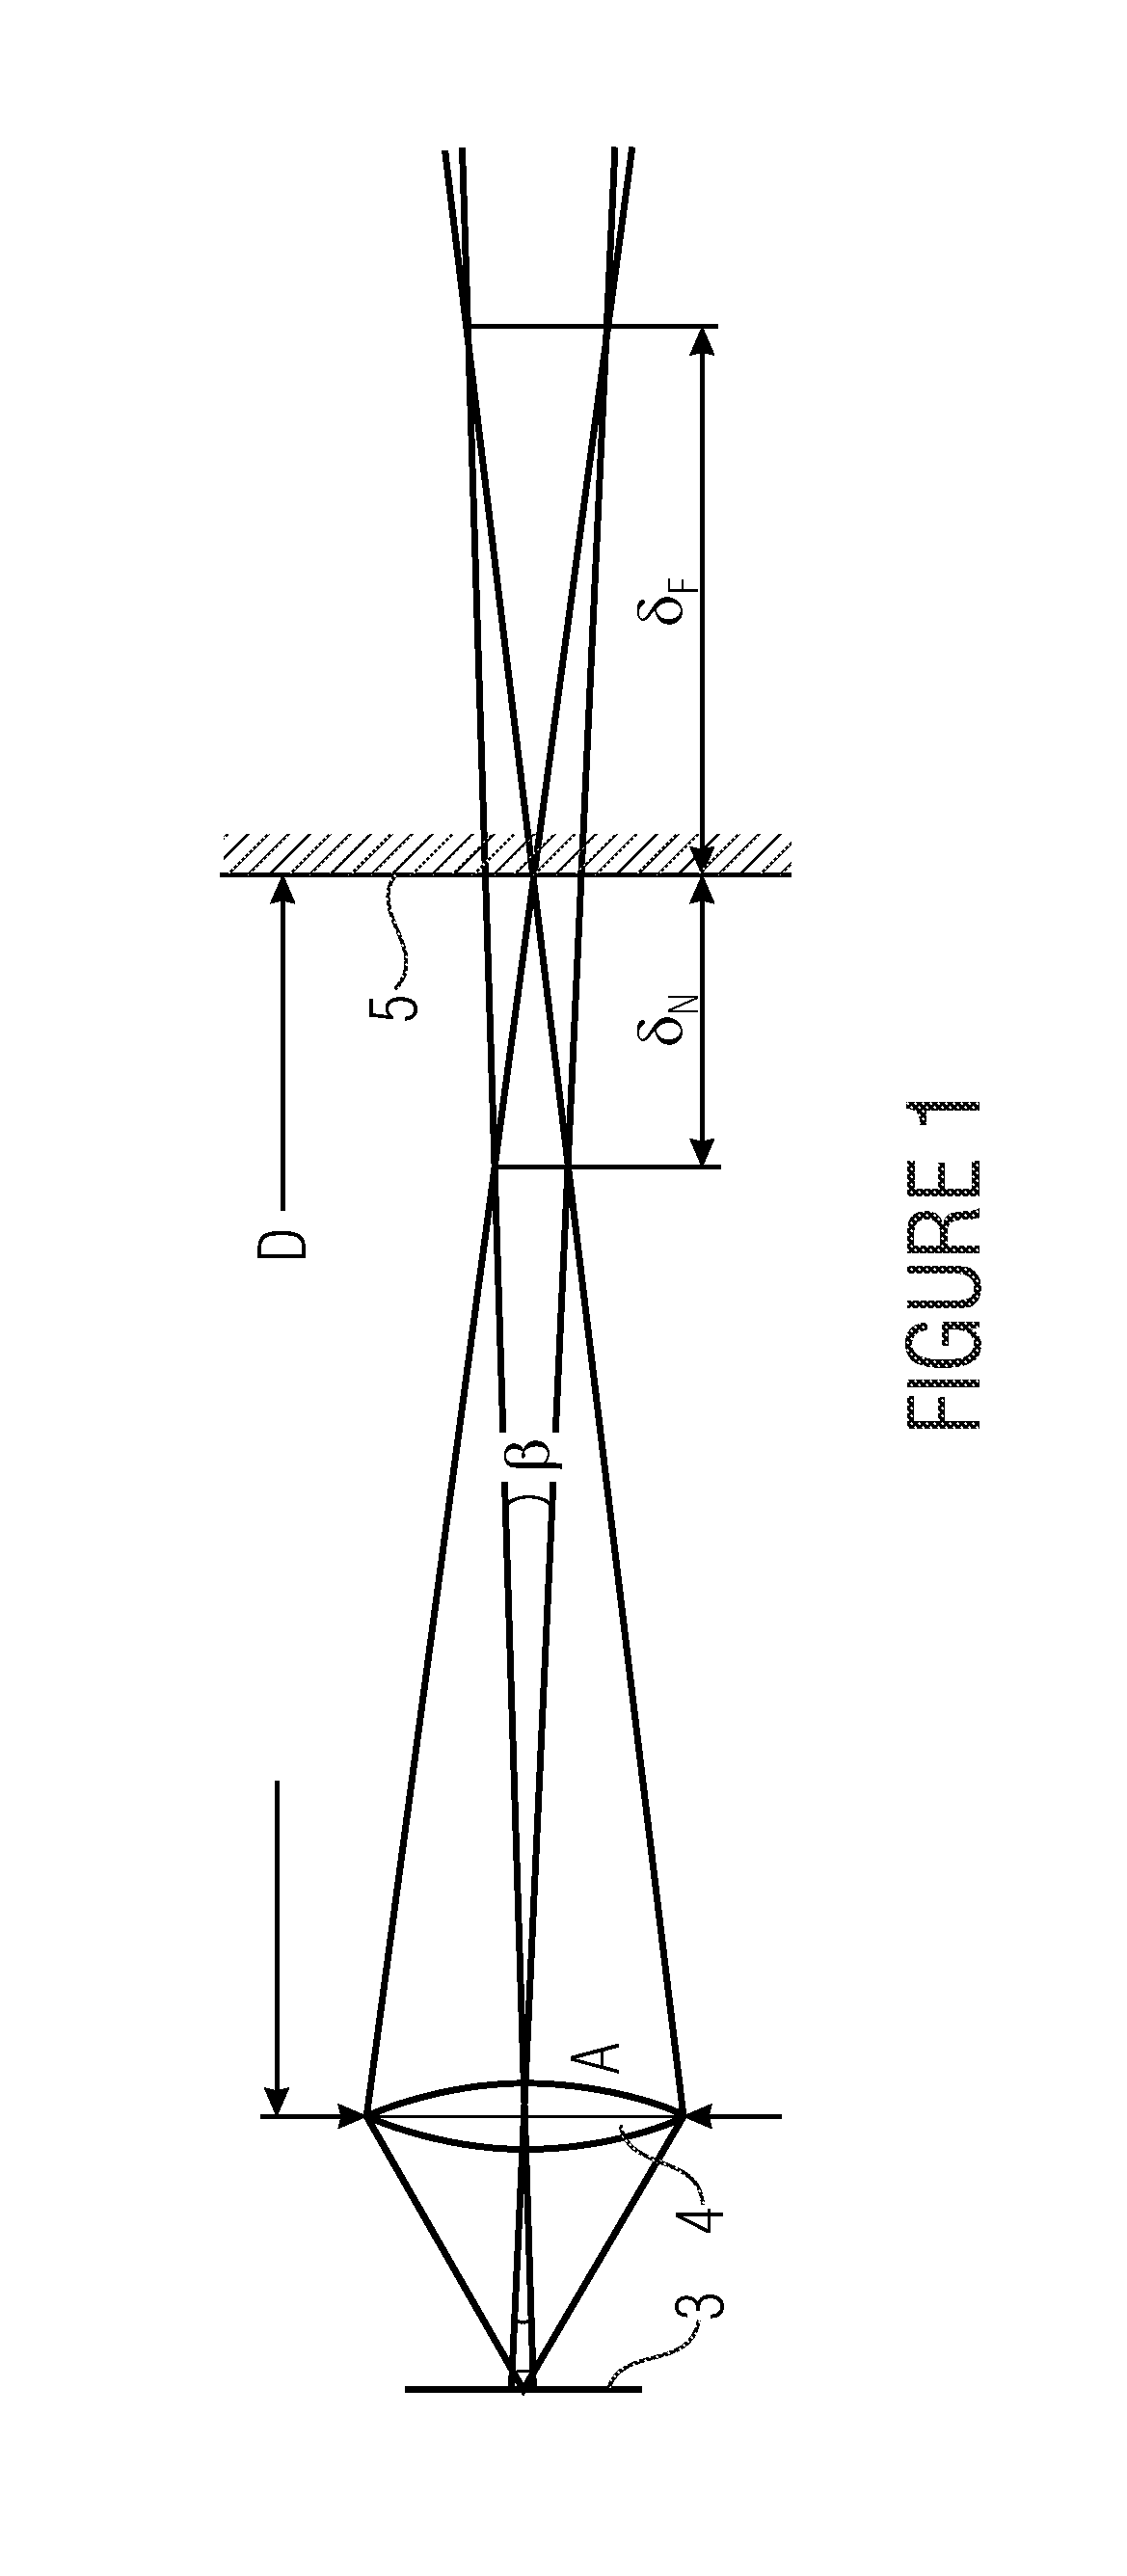 Projection display with multi-channel optics with non-circular overall aperture